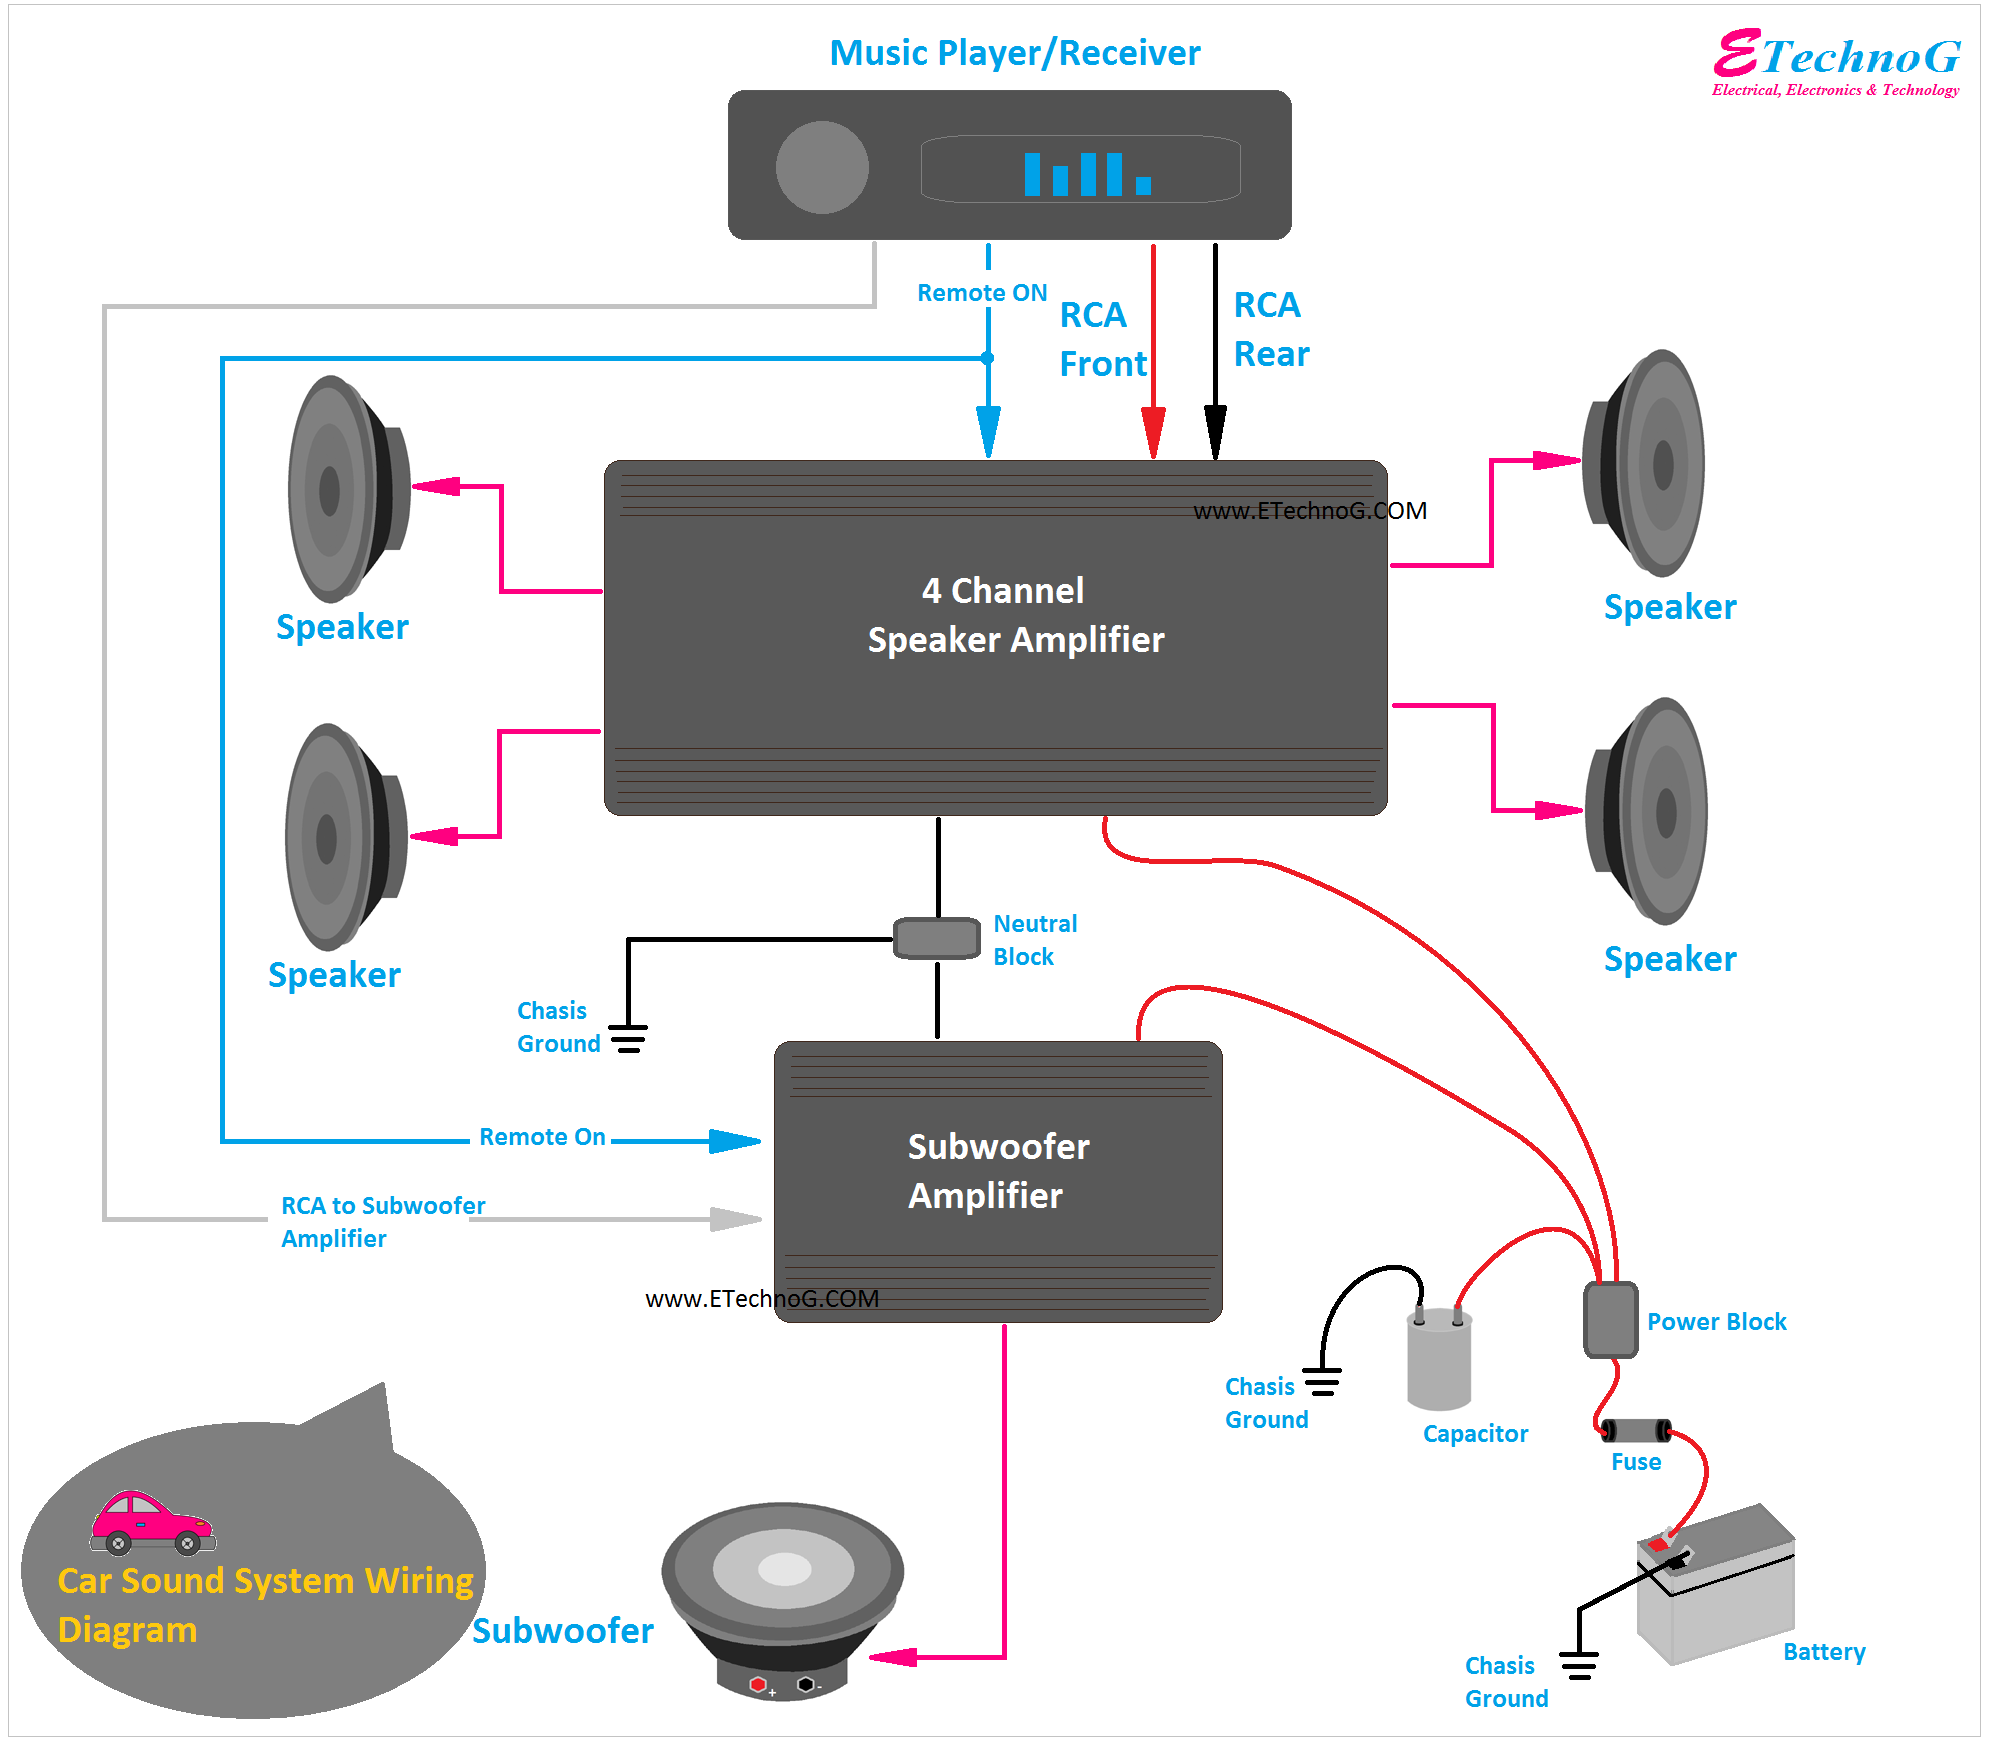 Car Sound System Wiring Diagram and connection with amplifier, subwoofer